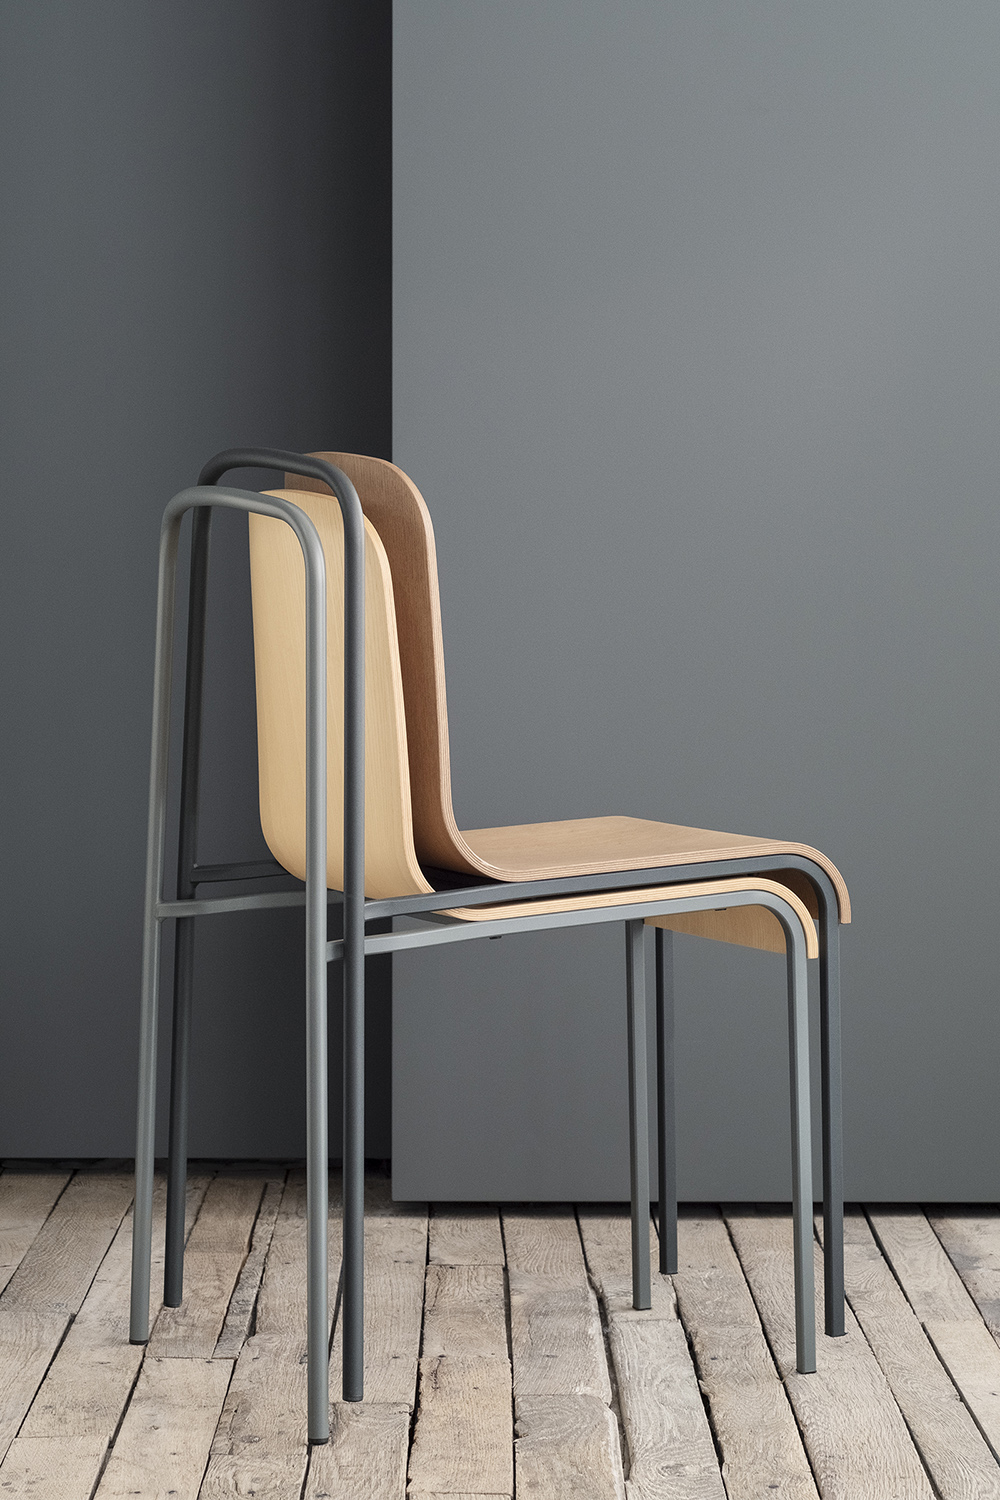 Mue stackable chair, manufactured by Livoni